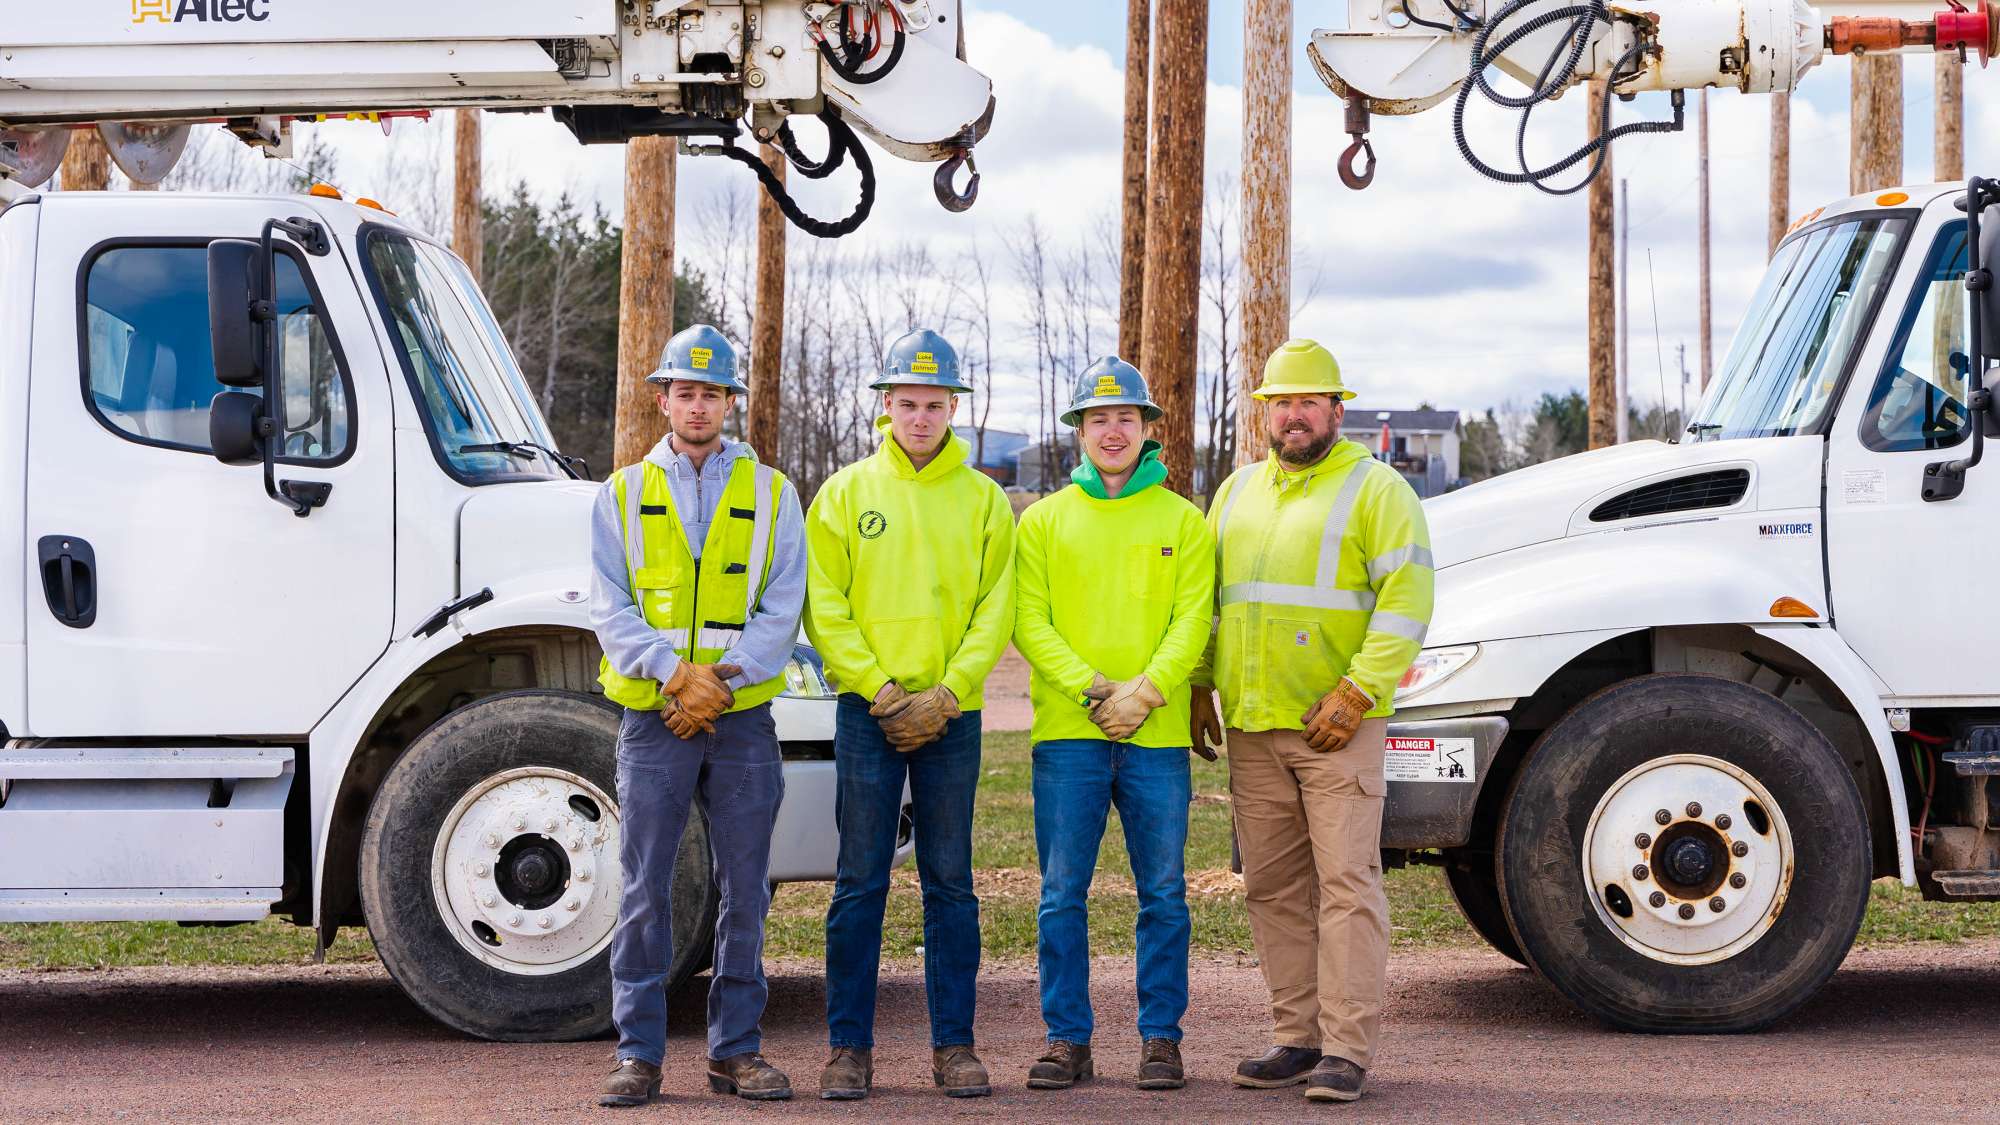 Electrical Power Distribution program students and instructor pose in their work gear in front of two trucks.